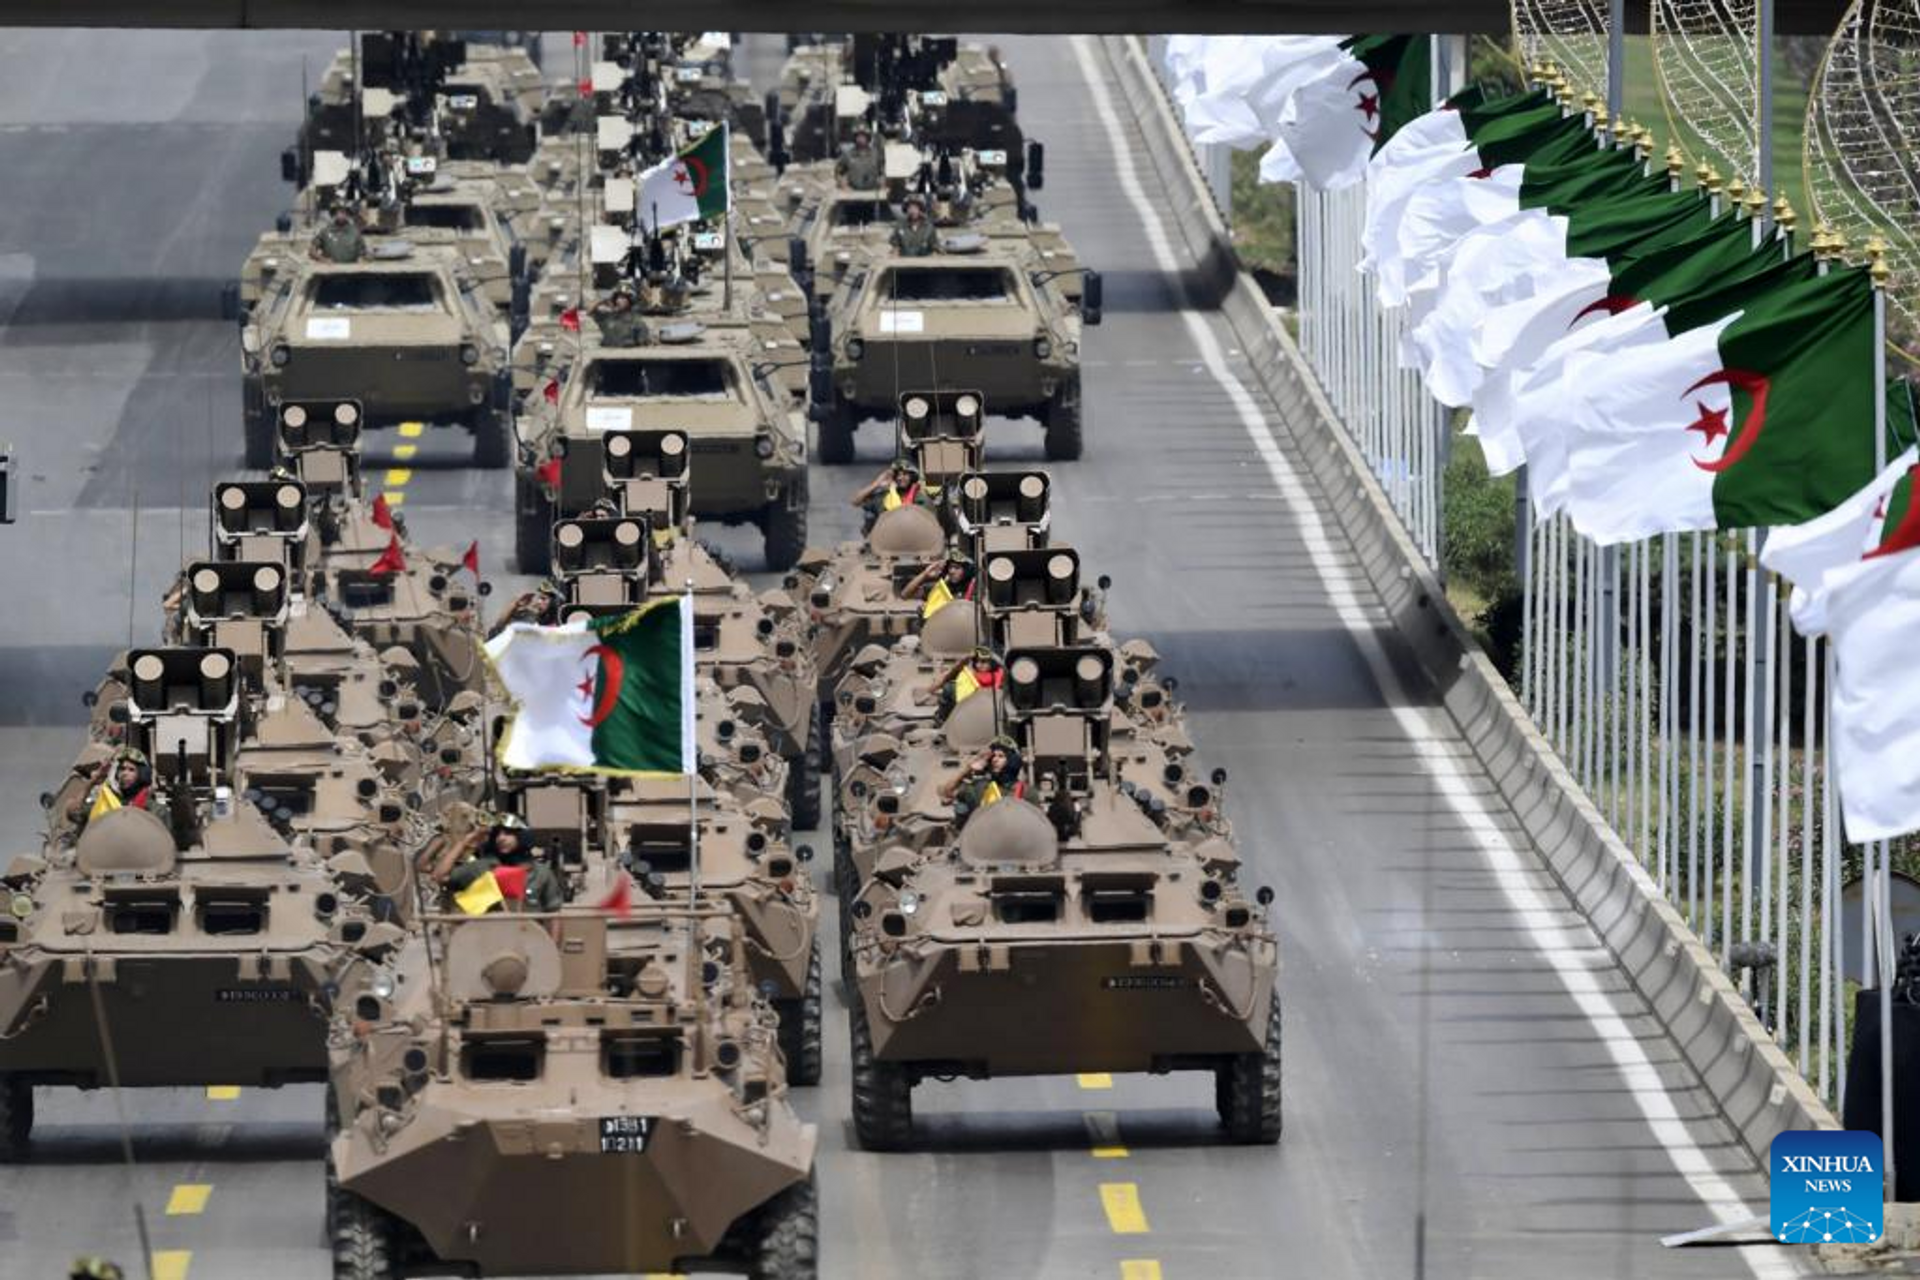 Military vehicles are driven during a military parade to celebrate the 60th anniversary of Algeria's independence in Algiers, capital of Algeria, on July 5, 2022. Algeria on Tuesday held a grand military parade to celebrate the 60th anniversary of its independence from French colonialism, with the attendance of senior local and foreign officials - Sputnik International, 1920, 06.07.2022